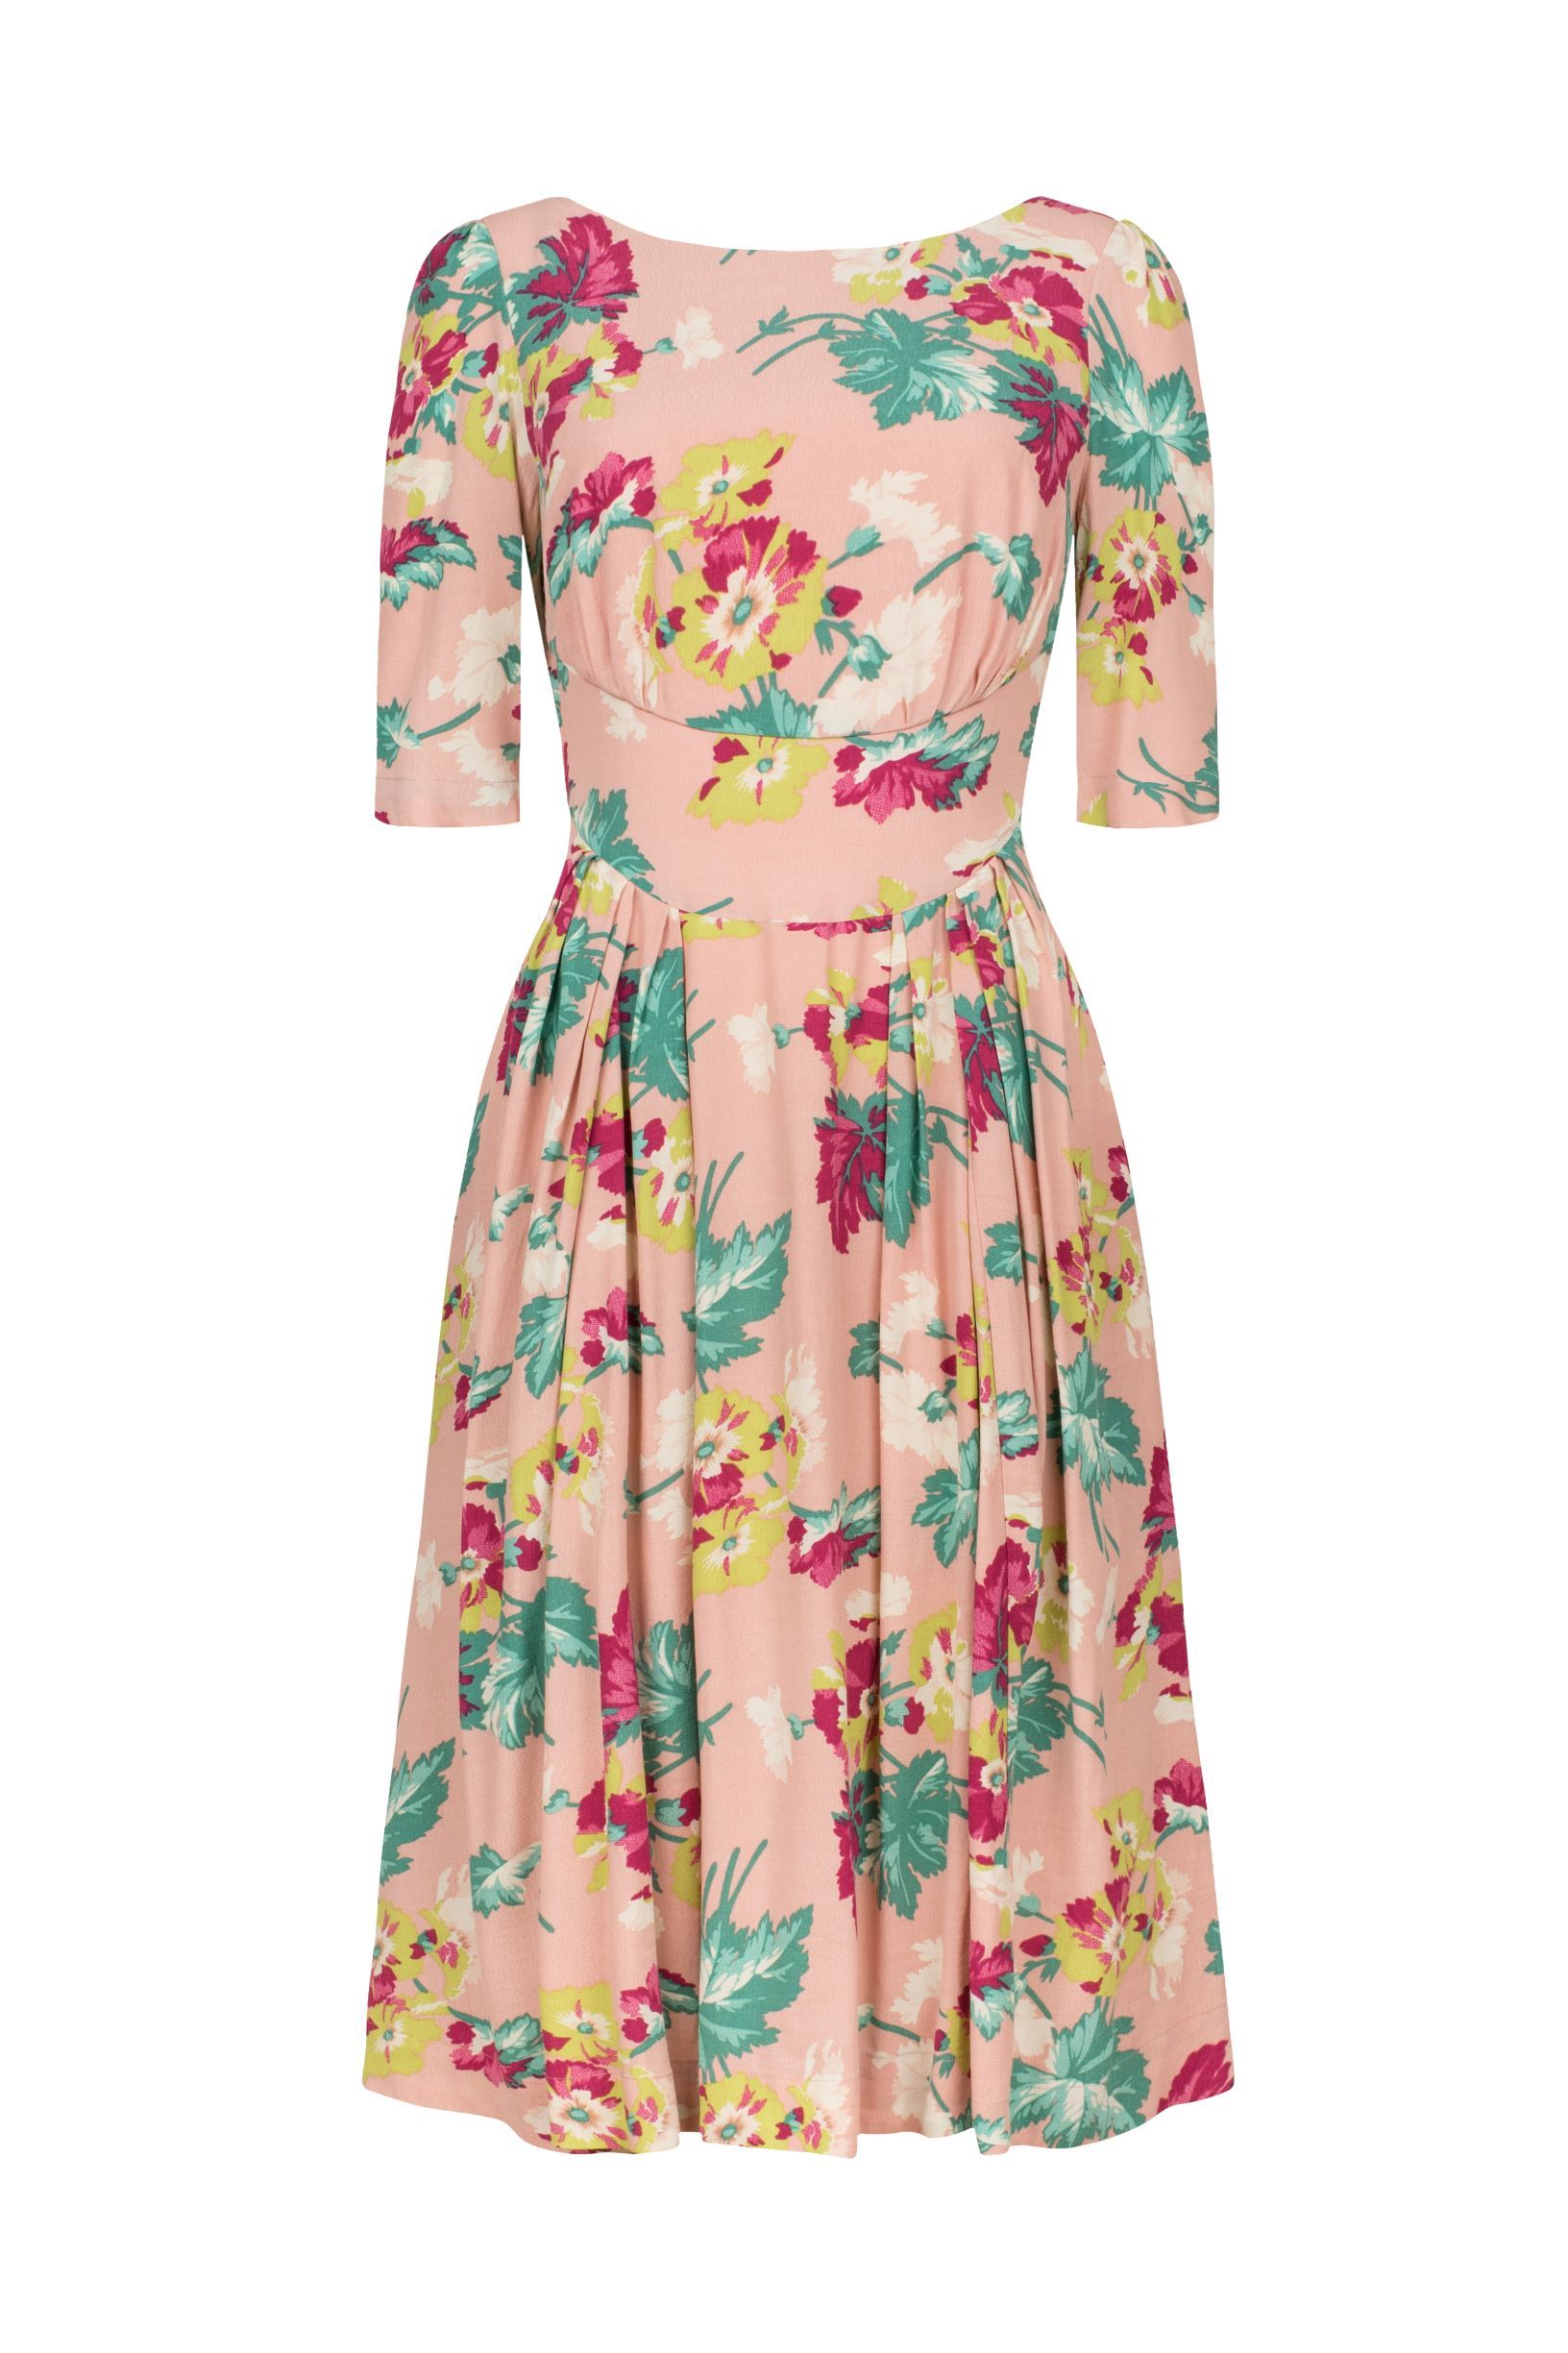 Pretty in Pink Floral Louisa Dress Emily & Fin - BouChic 